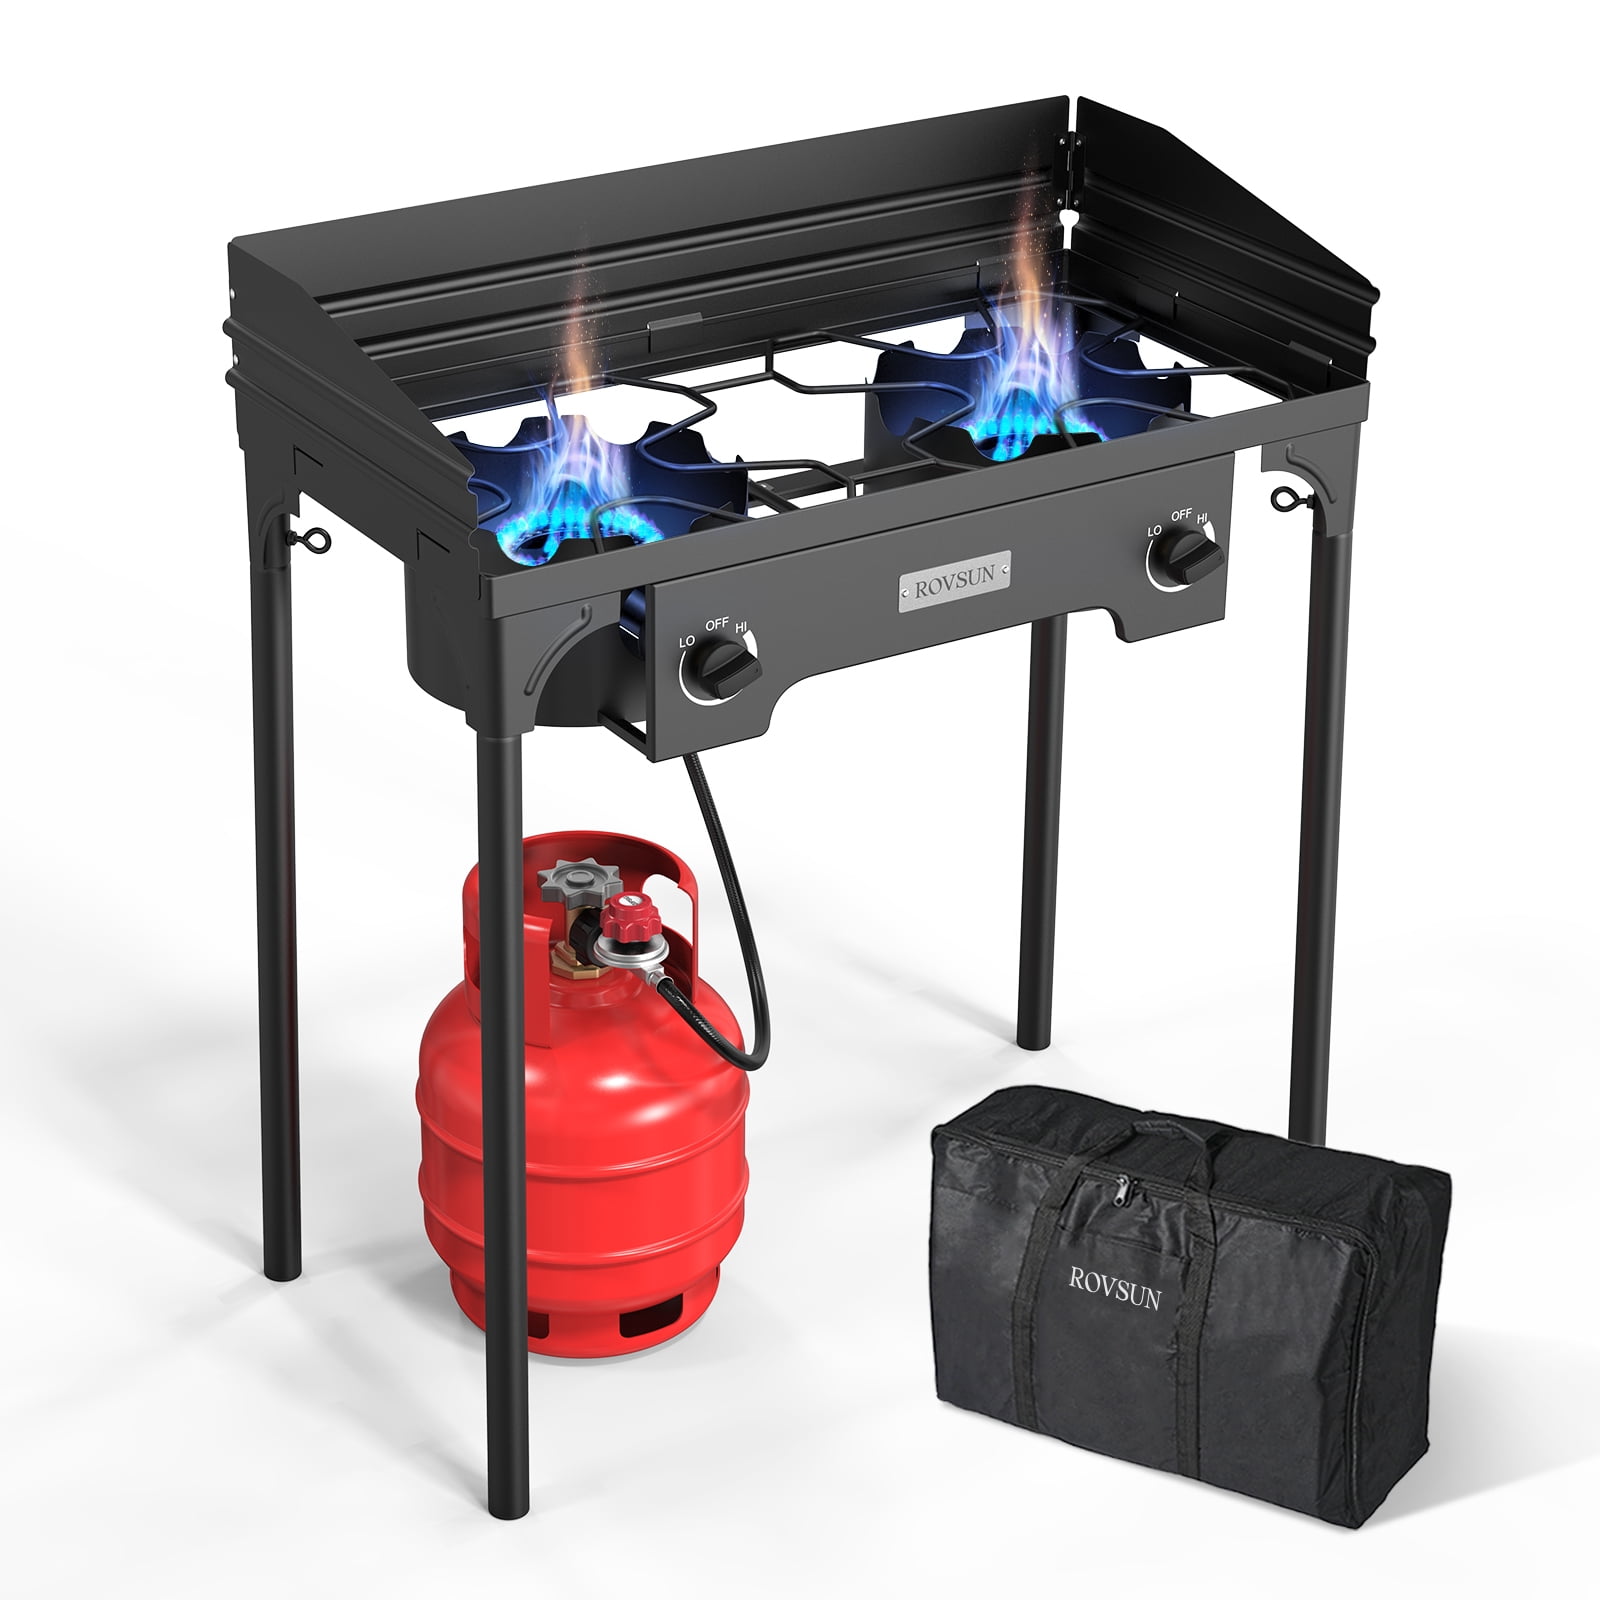 Portable Butane Stove for Indoor Wok Use? : r/Cooking